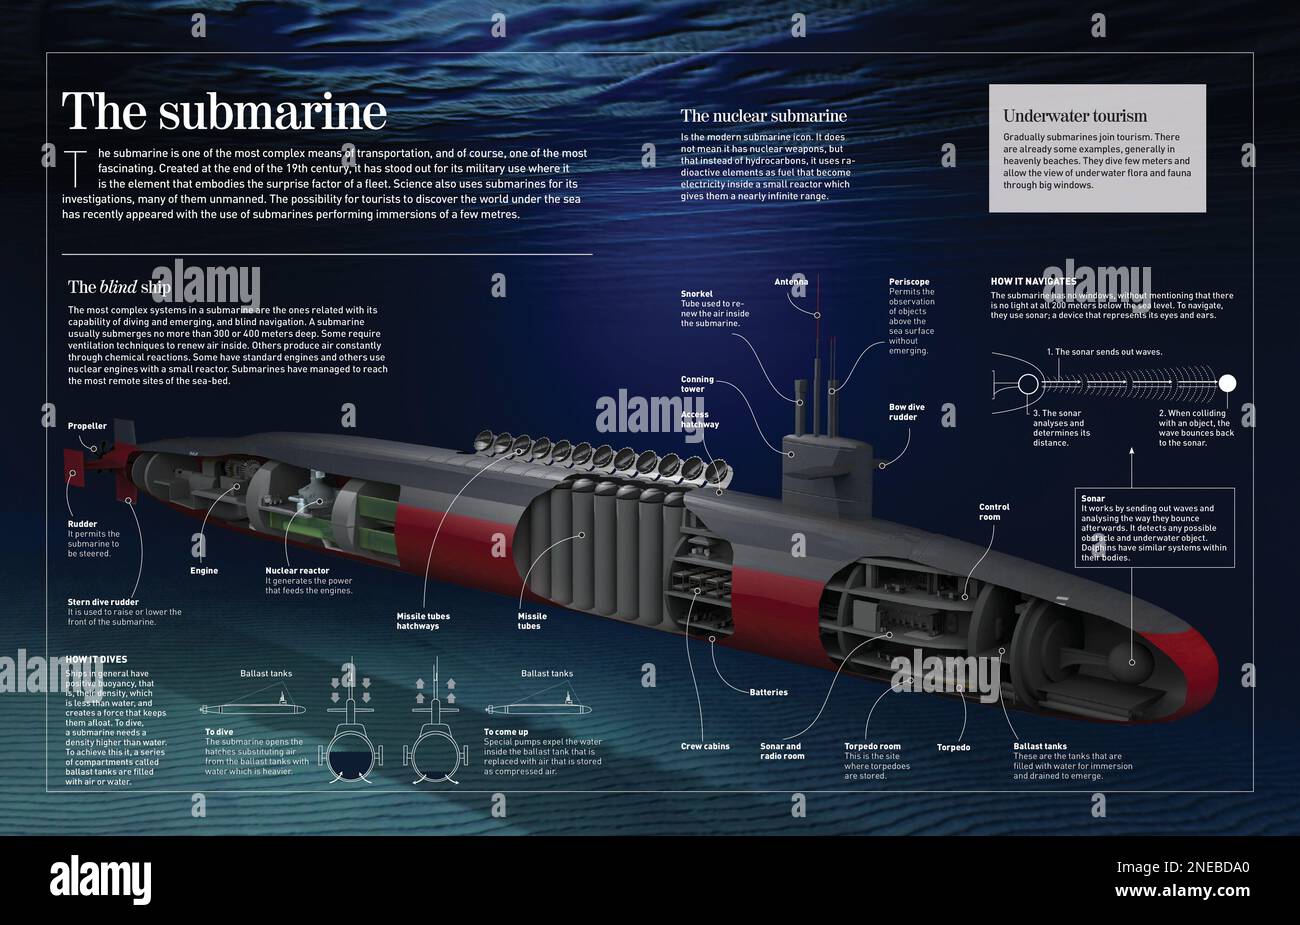 Infographic about the submarine (1620) its main components and how it works. [Adobe InDesign (.indd); 4960x3188]. Stock Photo